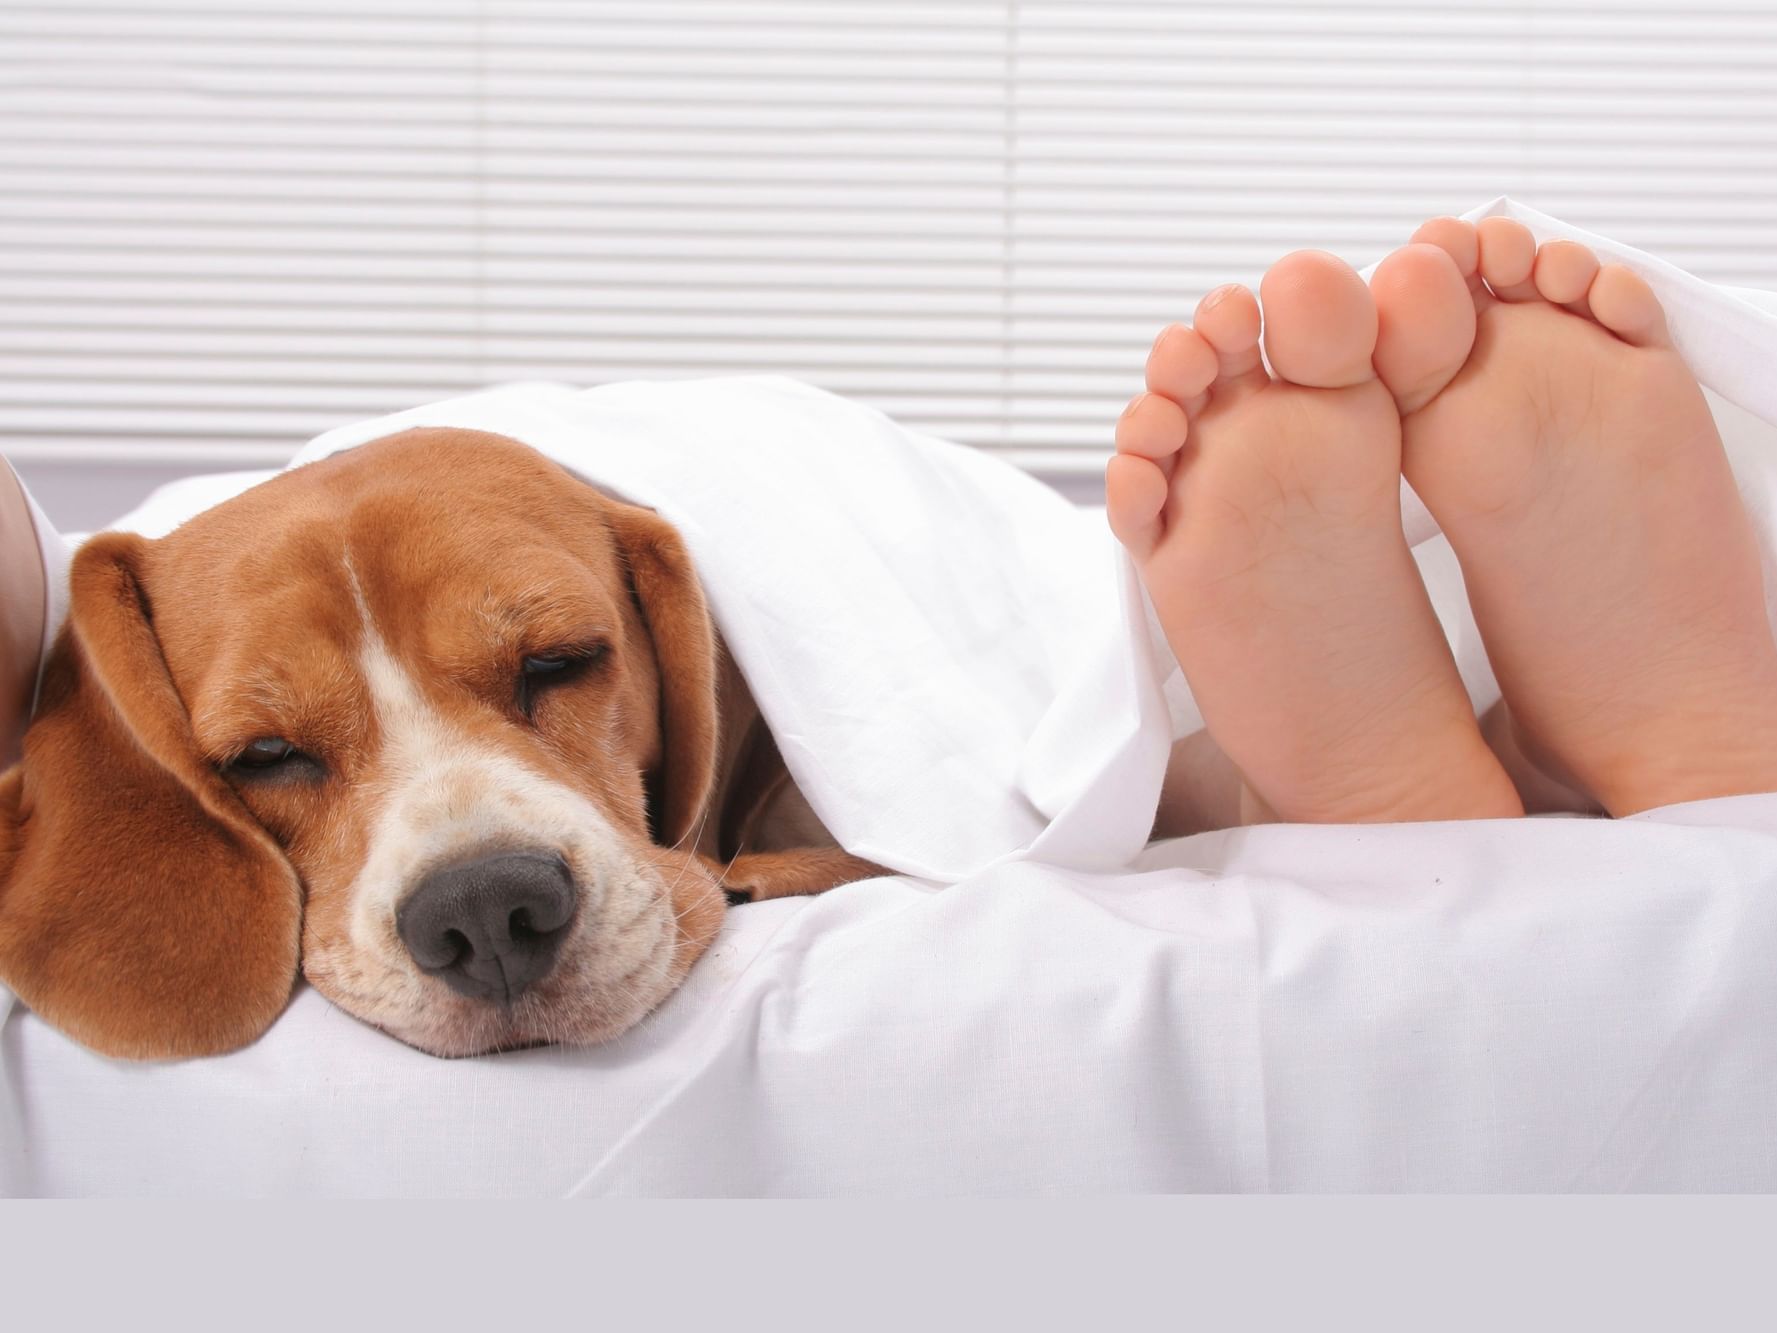 puppy in bed with human feet